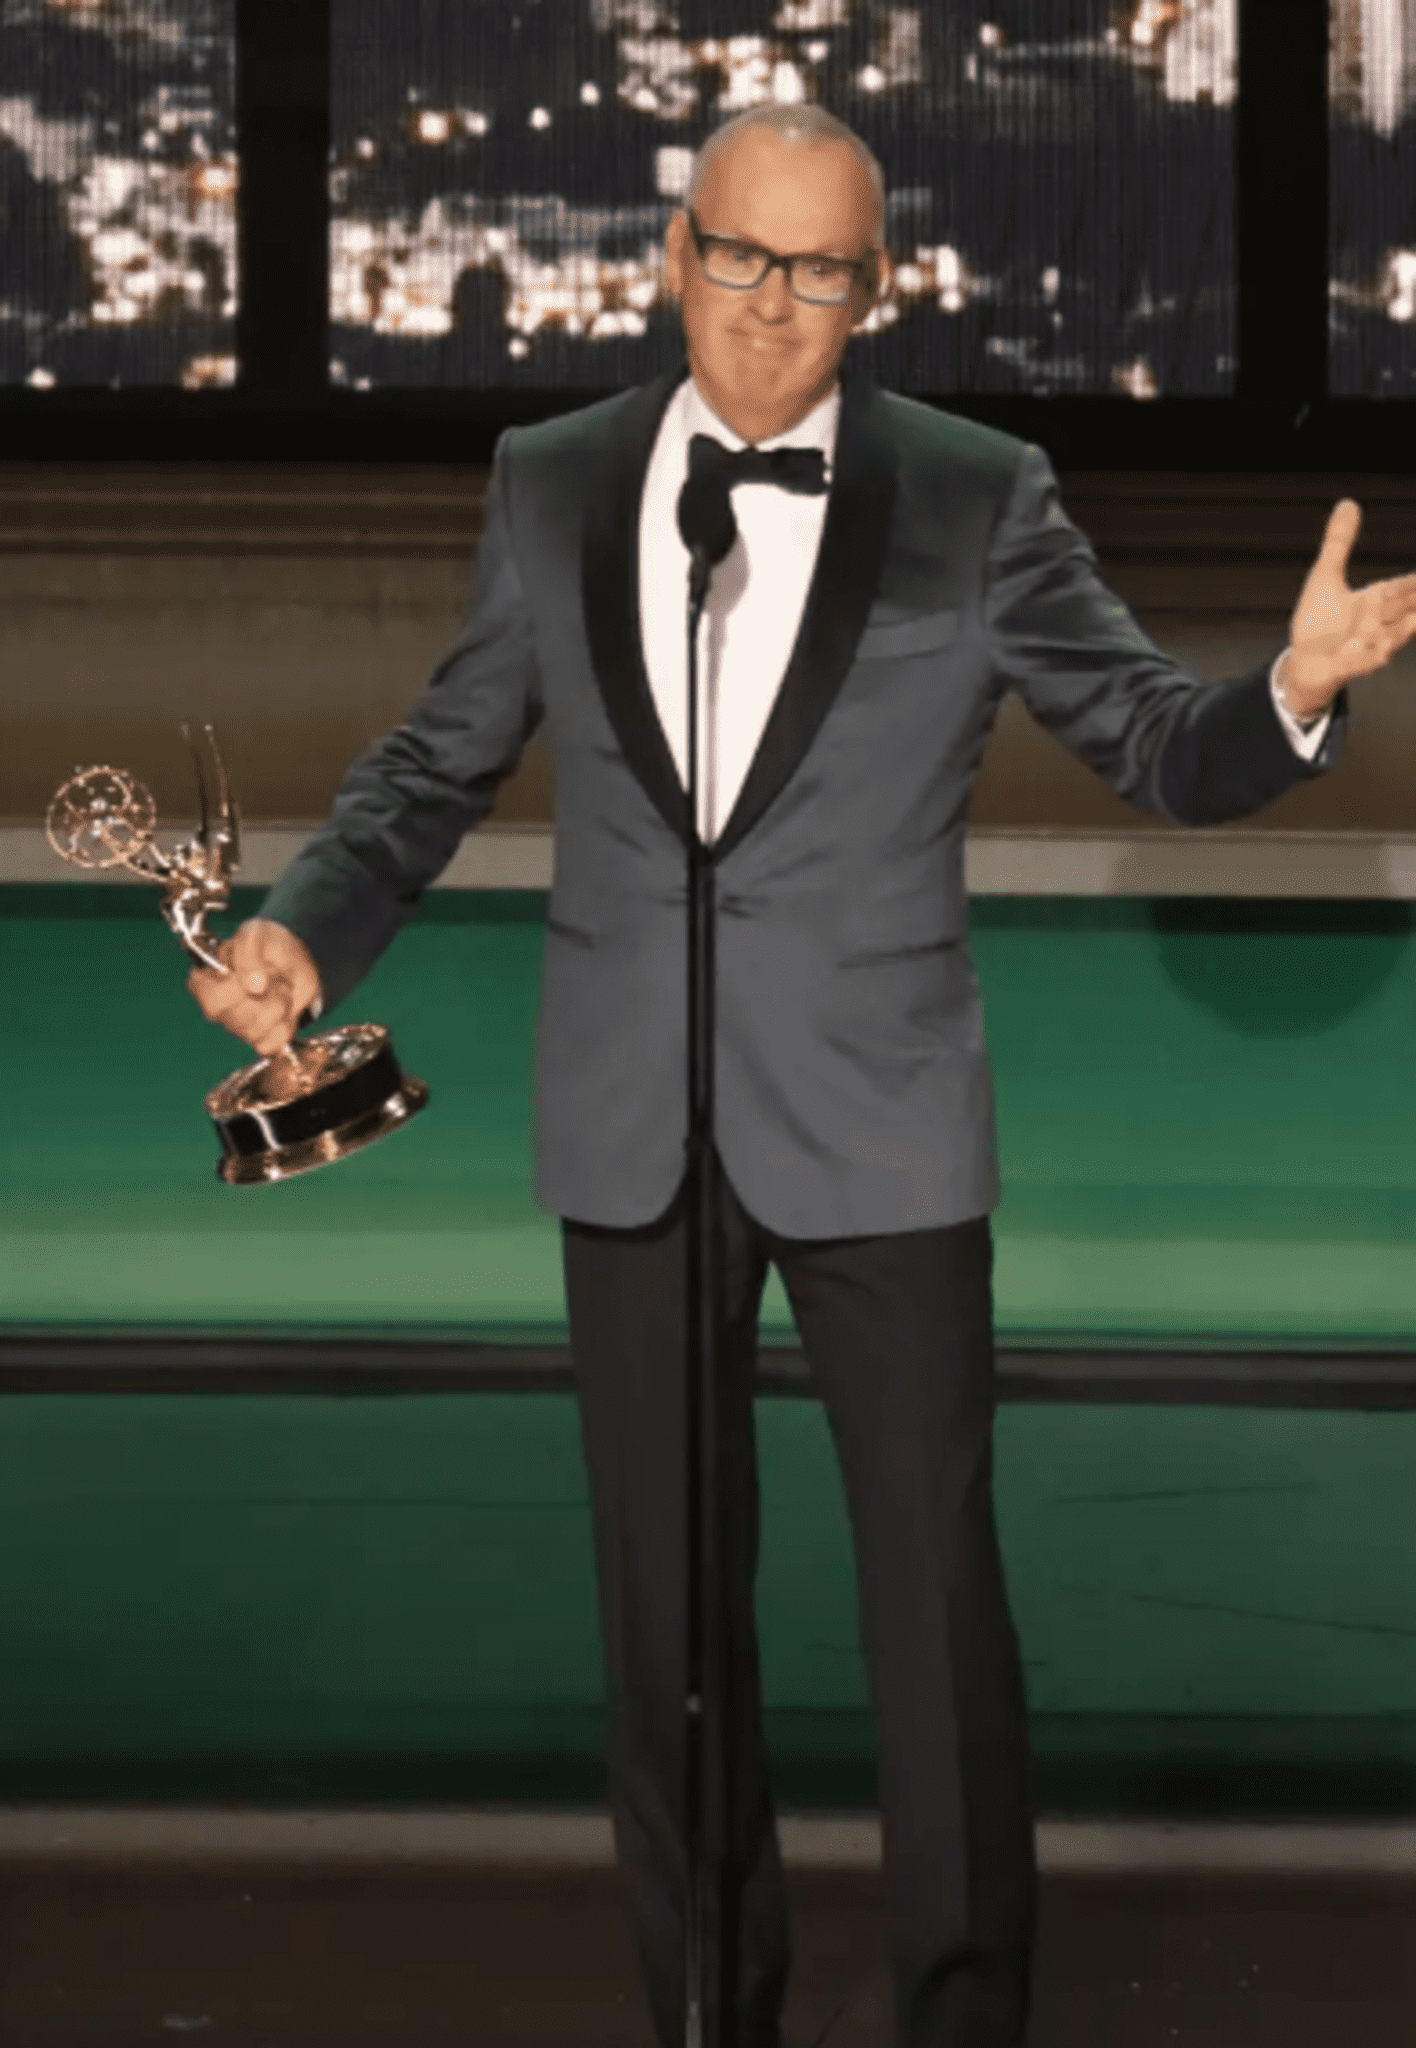 While accepting the prize for Best Lead Actor in a Limited Series, f-bomb-dropping Michael Keaton made headlines.